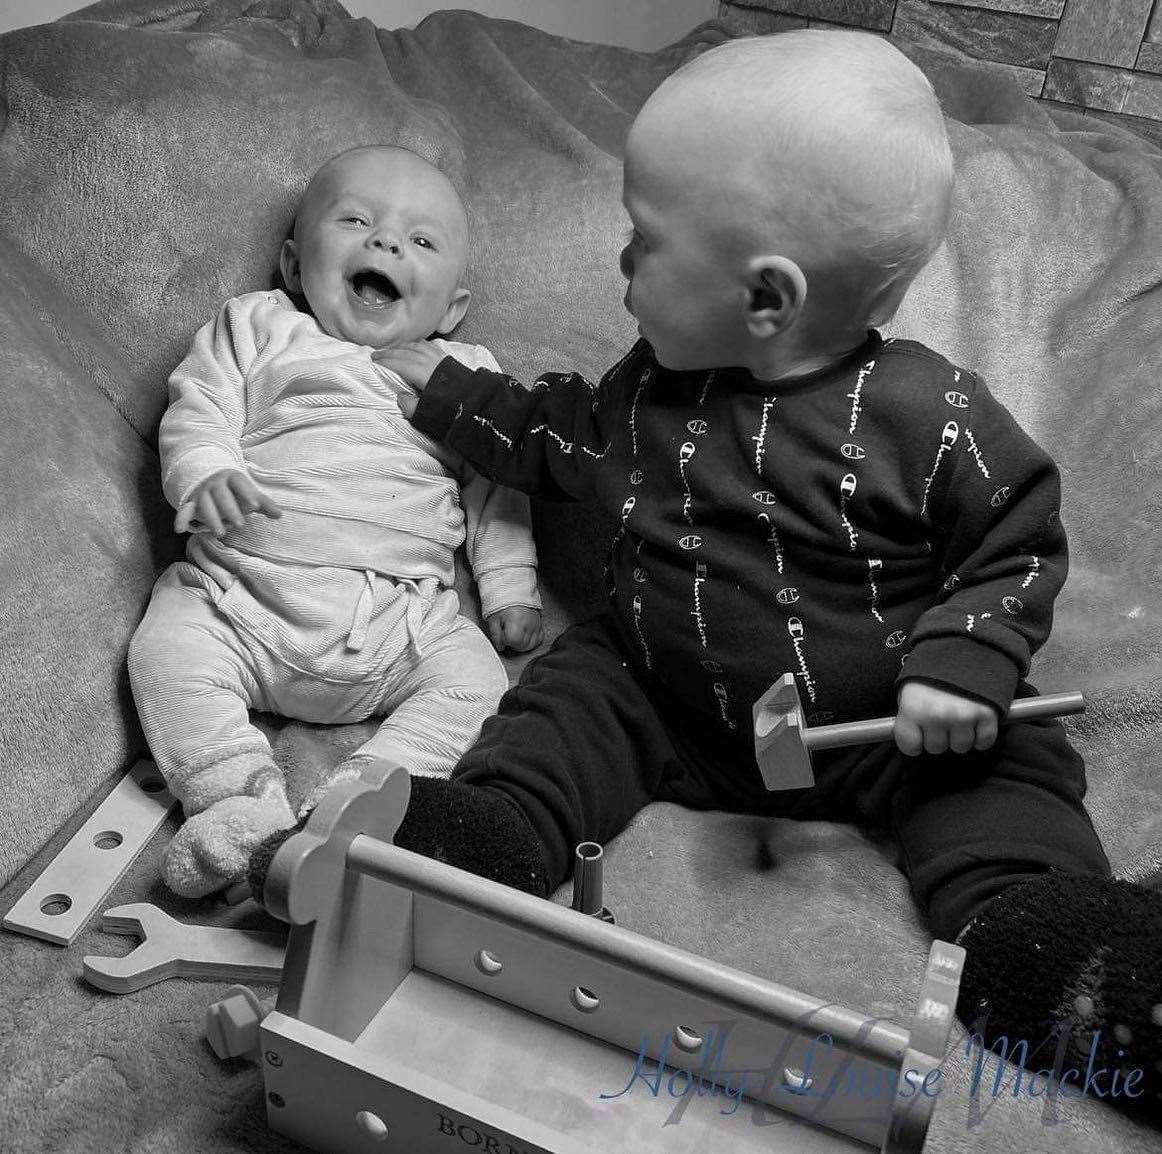 Brodie loves playing with his younger brother, 10-month-old Cade. Picture: SWNS